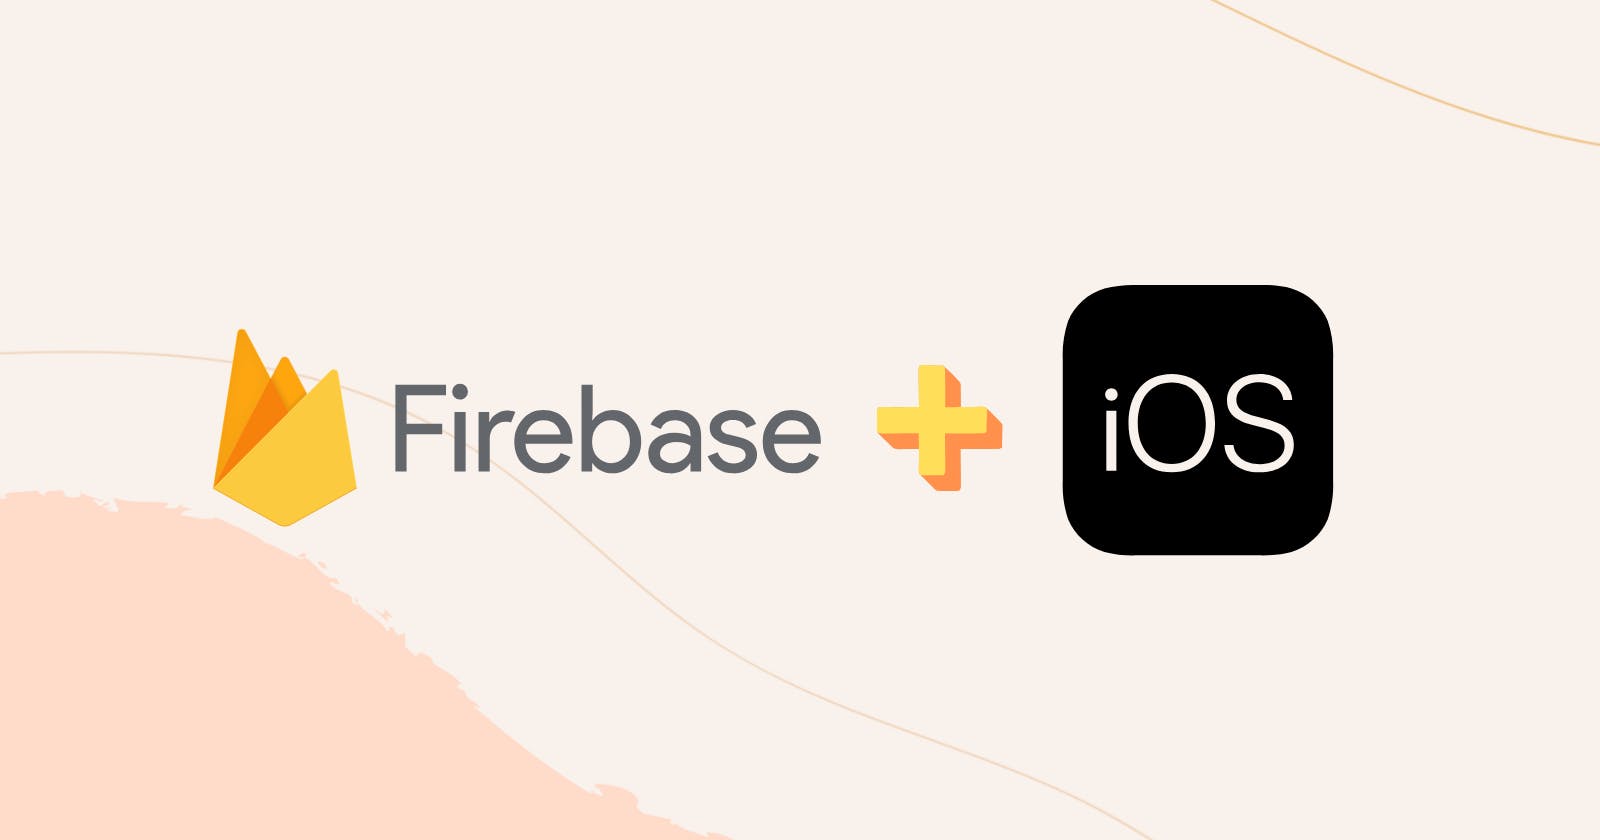 iOS: Getting Started with Firebase